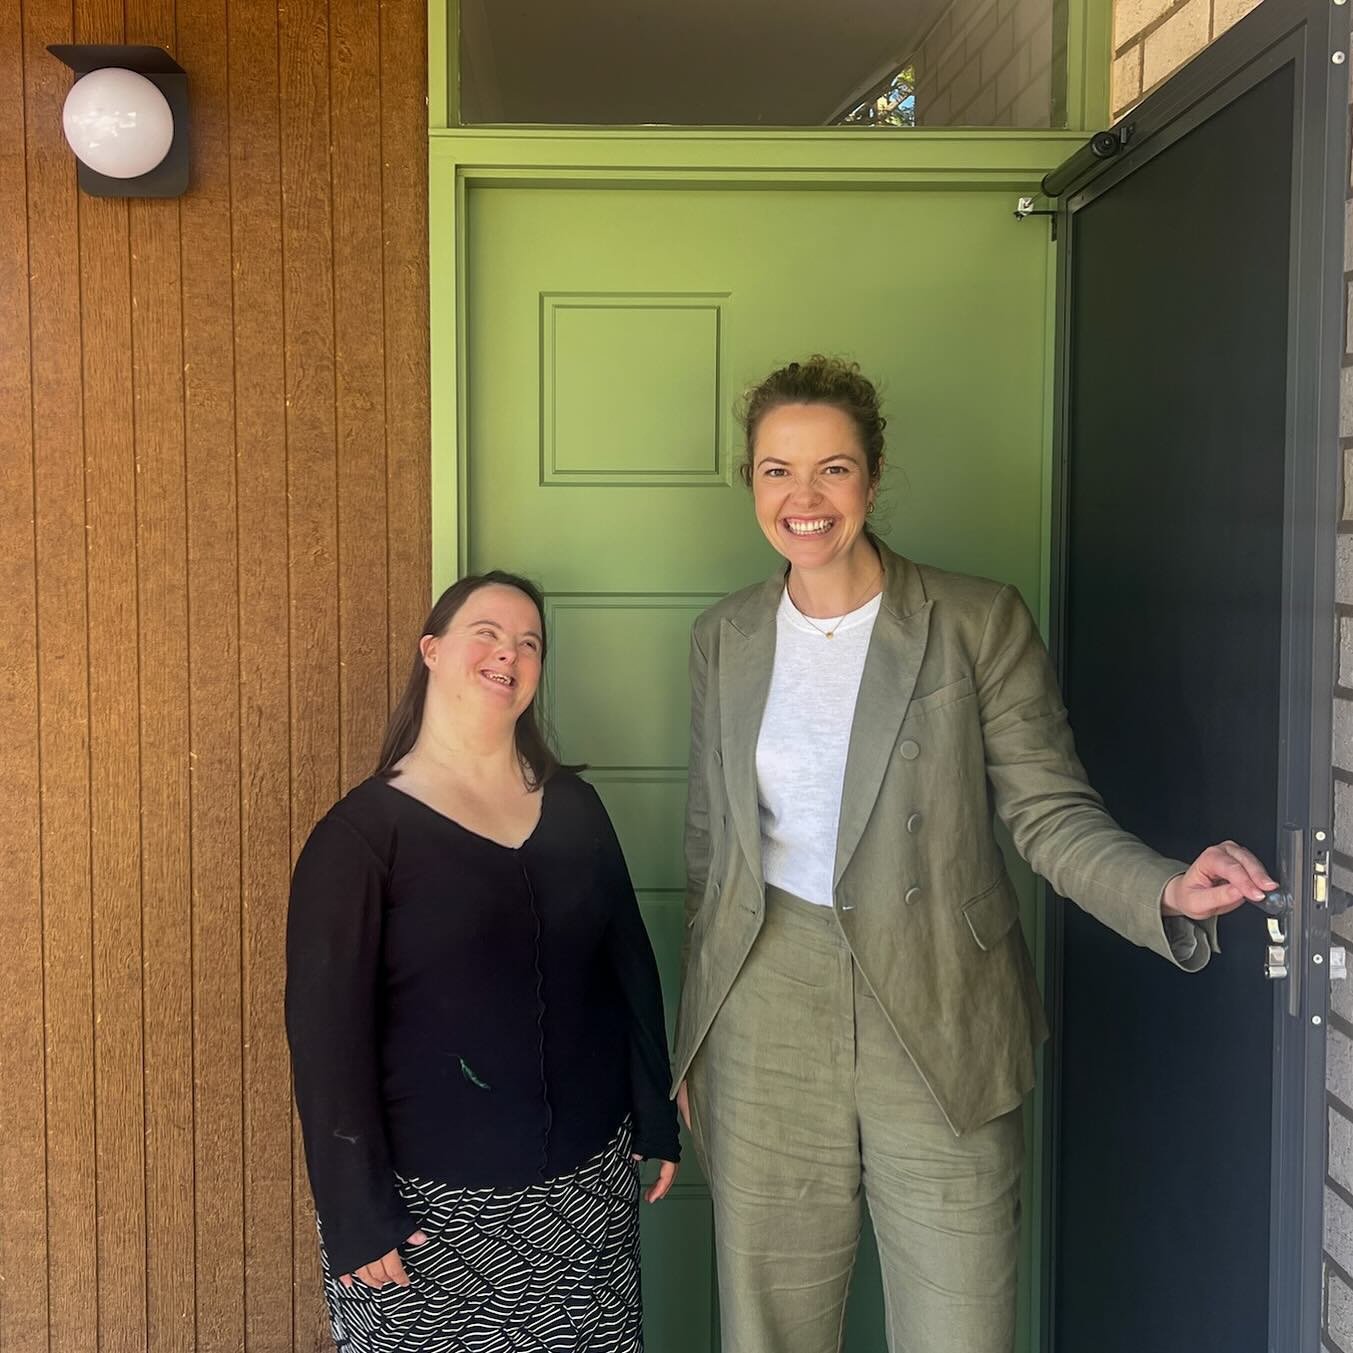 Yesterday Alethea got the keys to her new house and today I was fortunate enough to experience her excitement of moving into her first home with YourPlace Housing 🏡

The block of land which used to have only 1 house, now has 3 new community homes al